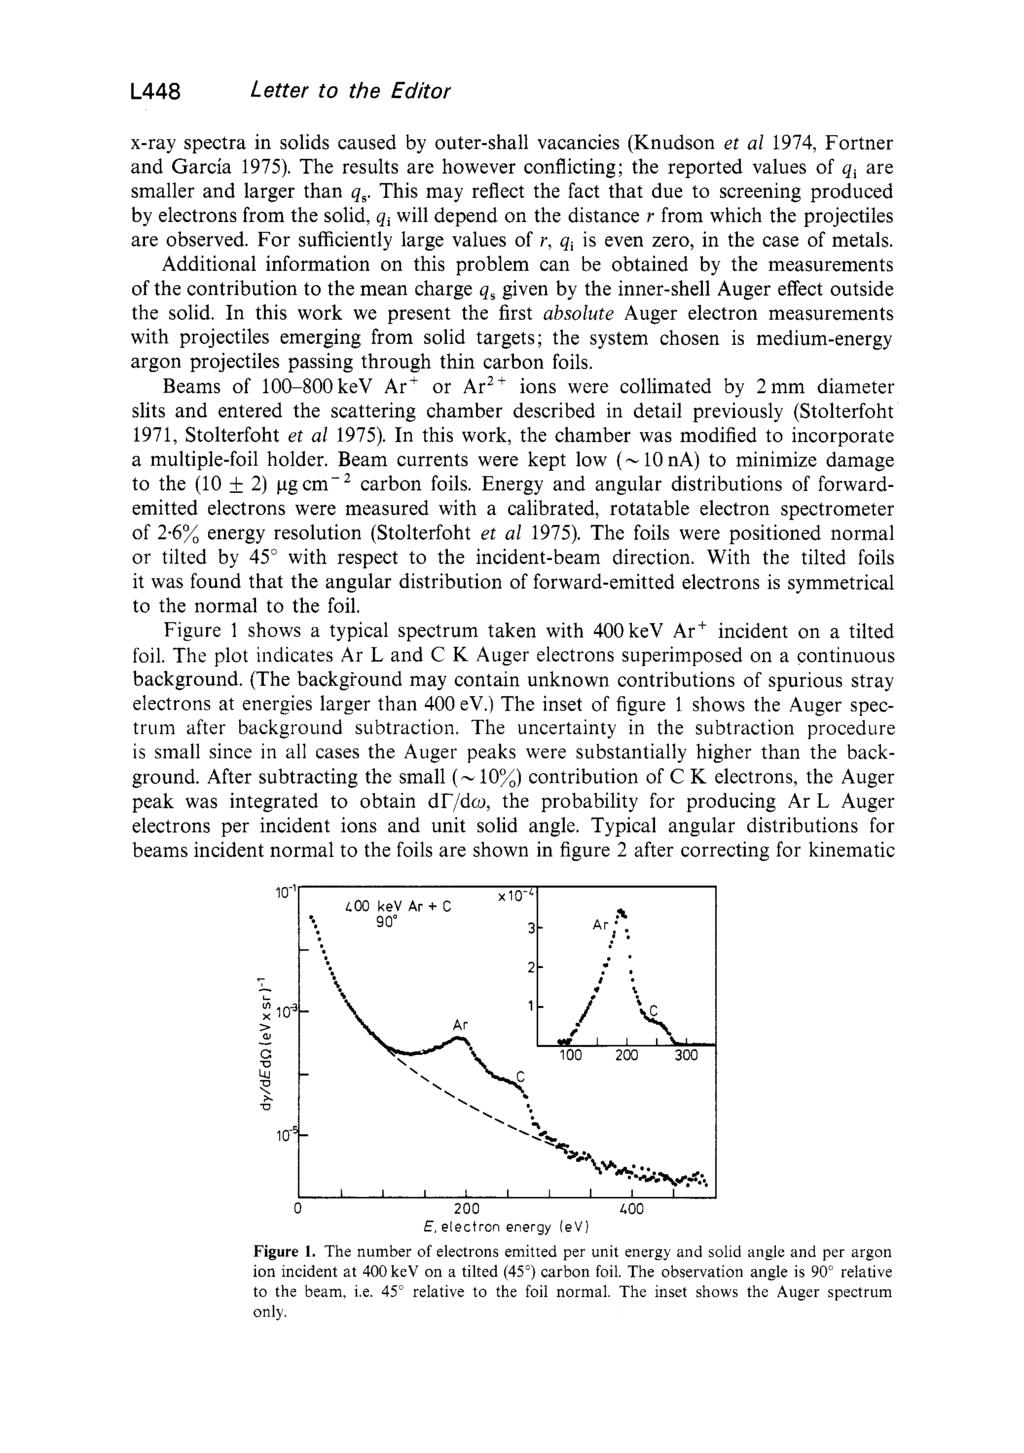 L448 Letter to the Editor x-ray spectra in solids caused by outer-shall vacancies (Knudson et a1 1974, Fortner and Garcia 1975).